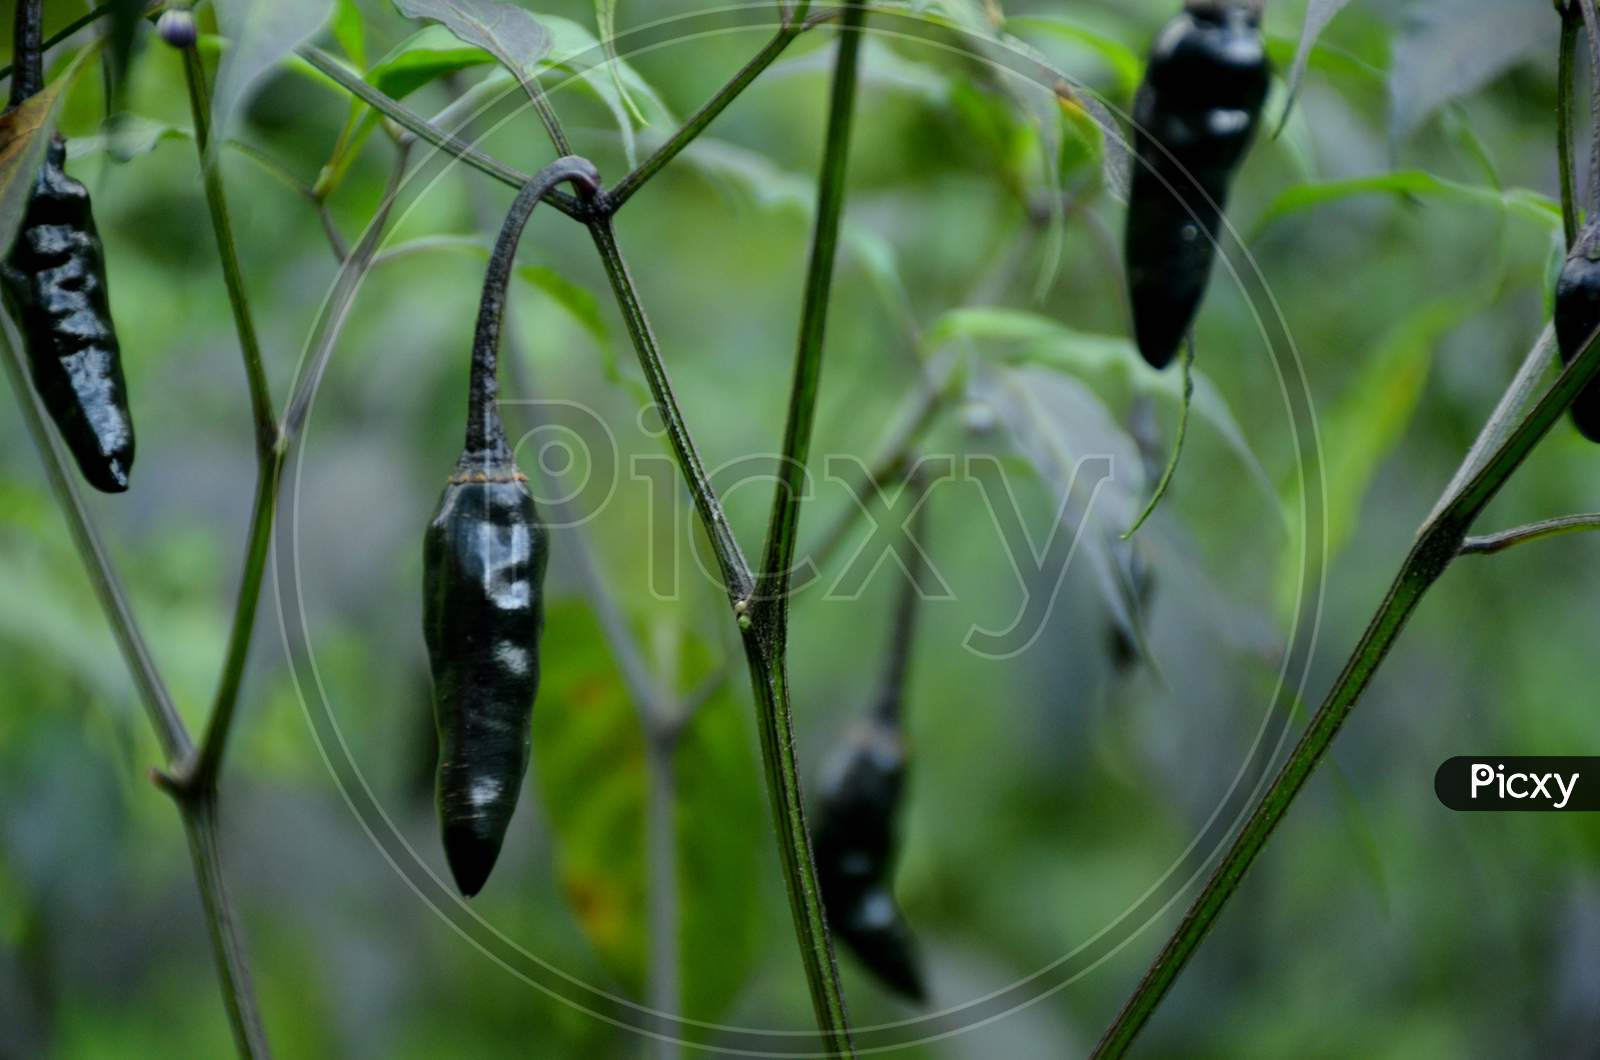 The Black Ripe Chilly With Leaves And Plant In The Garden.